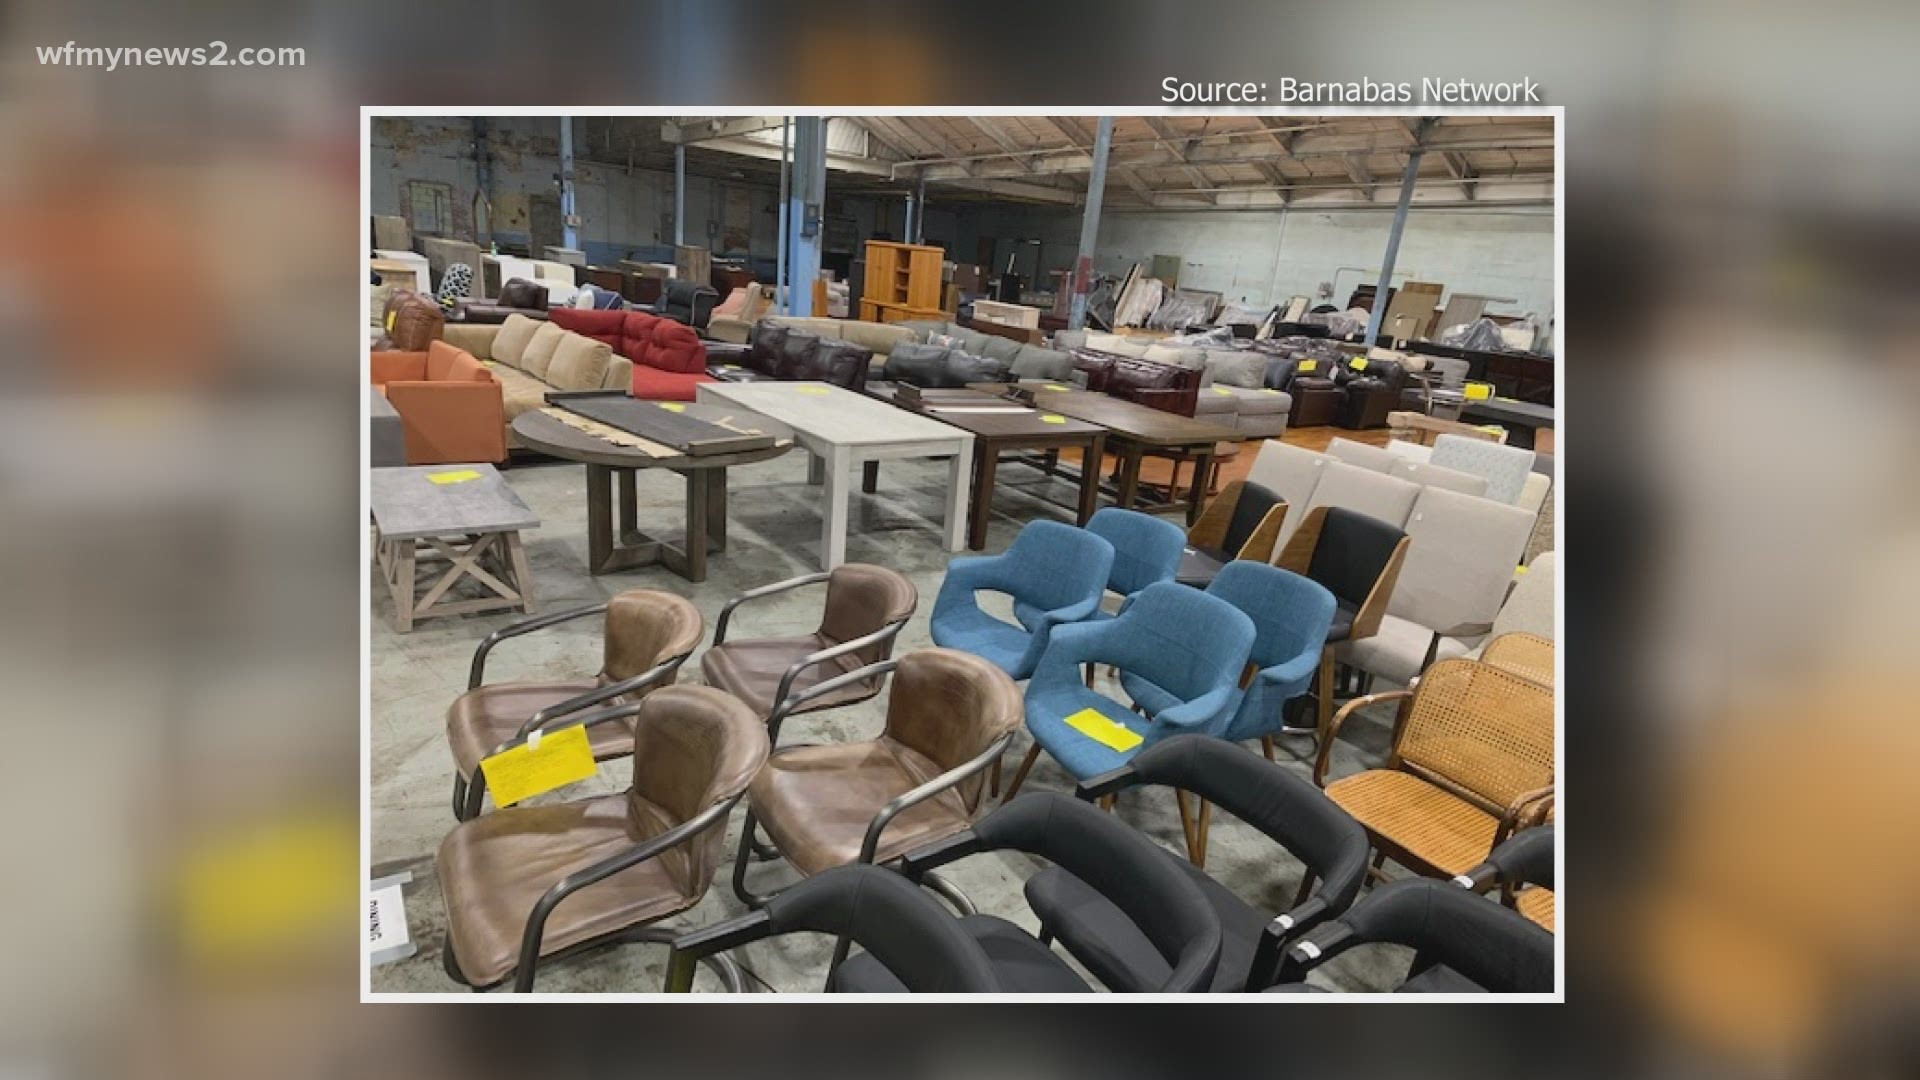 The Barnabas Network is auctioning off couches, living room sets, kitchen tables and everything you need for your bedroom at prices below the selling price.